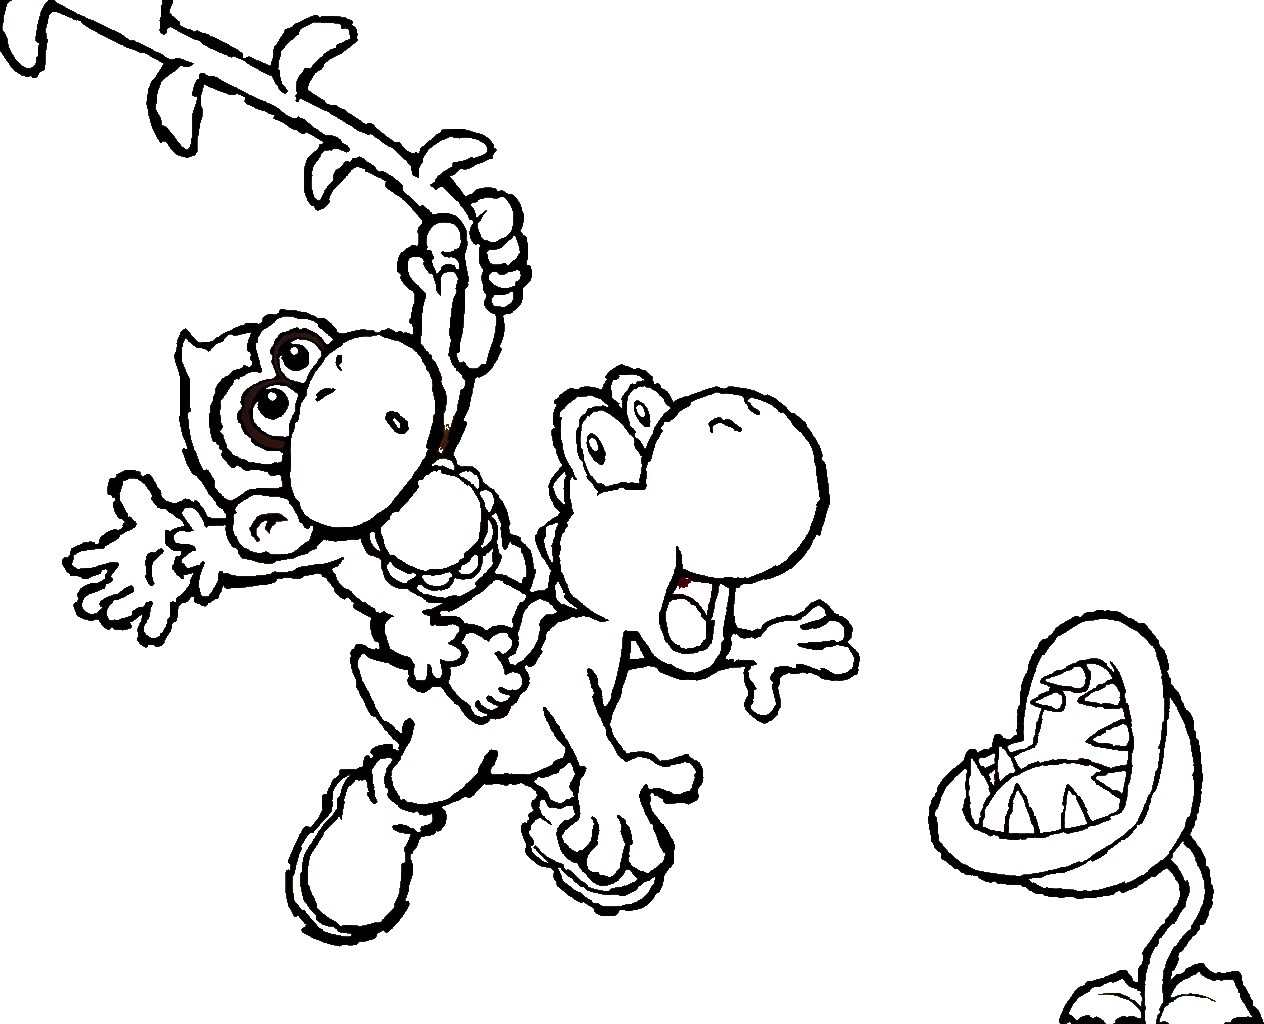 Yoshi Coloring Pages Pdf For Kids - Coloring Pages Yoshi